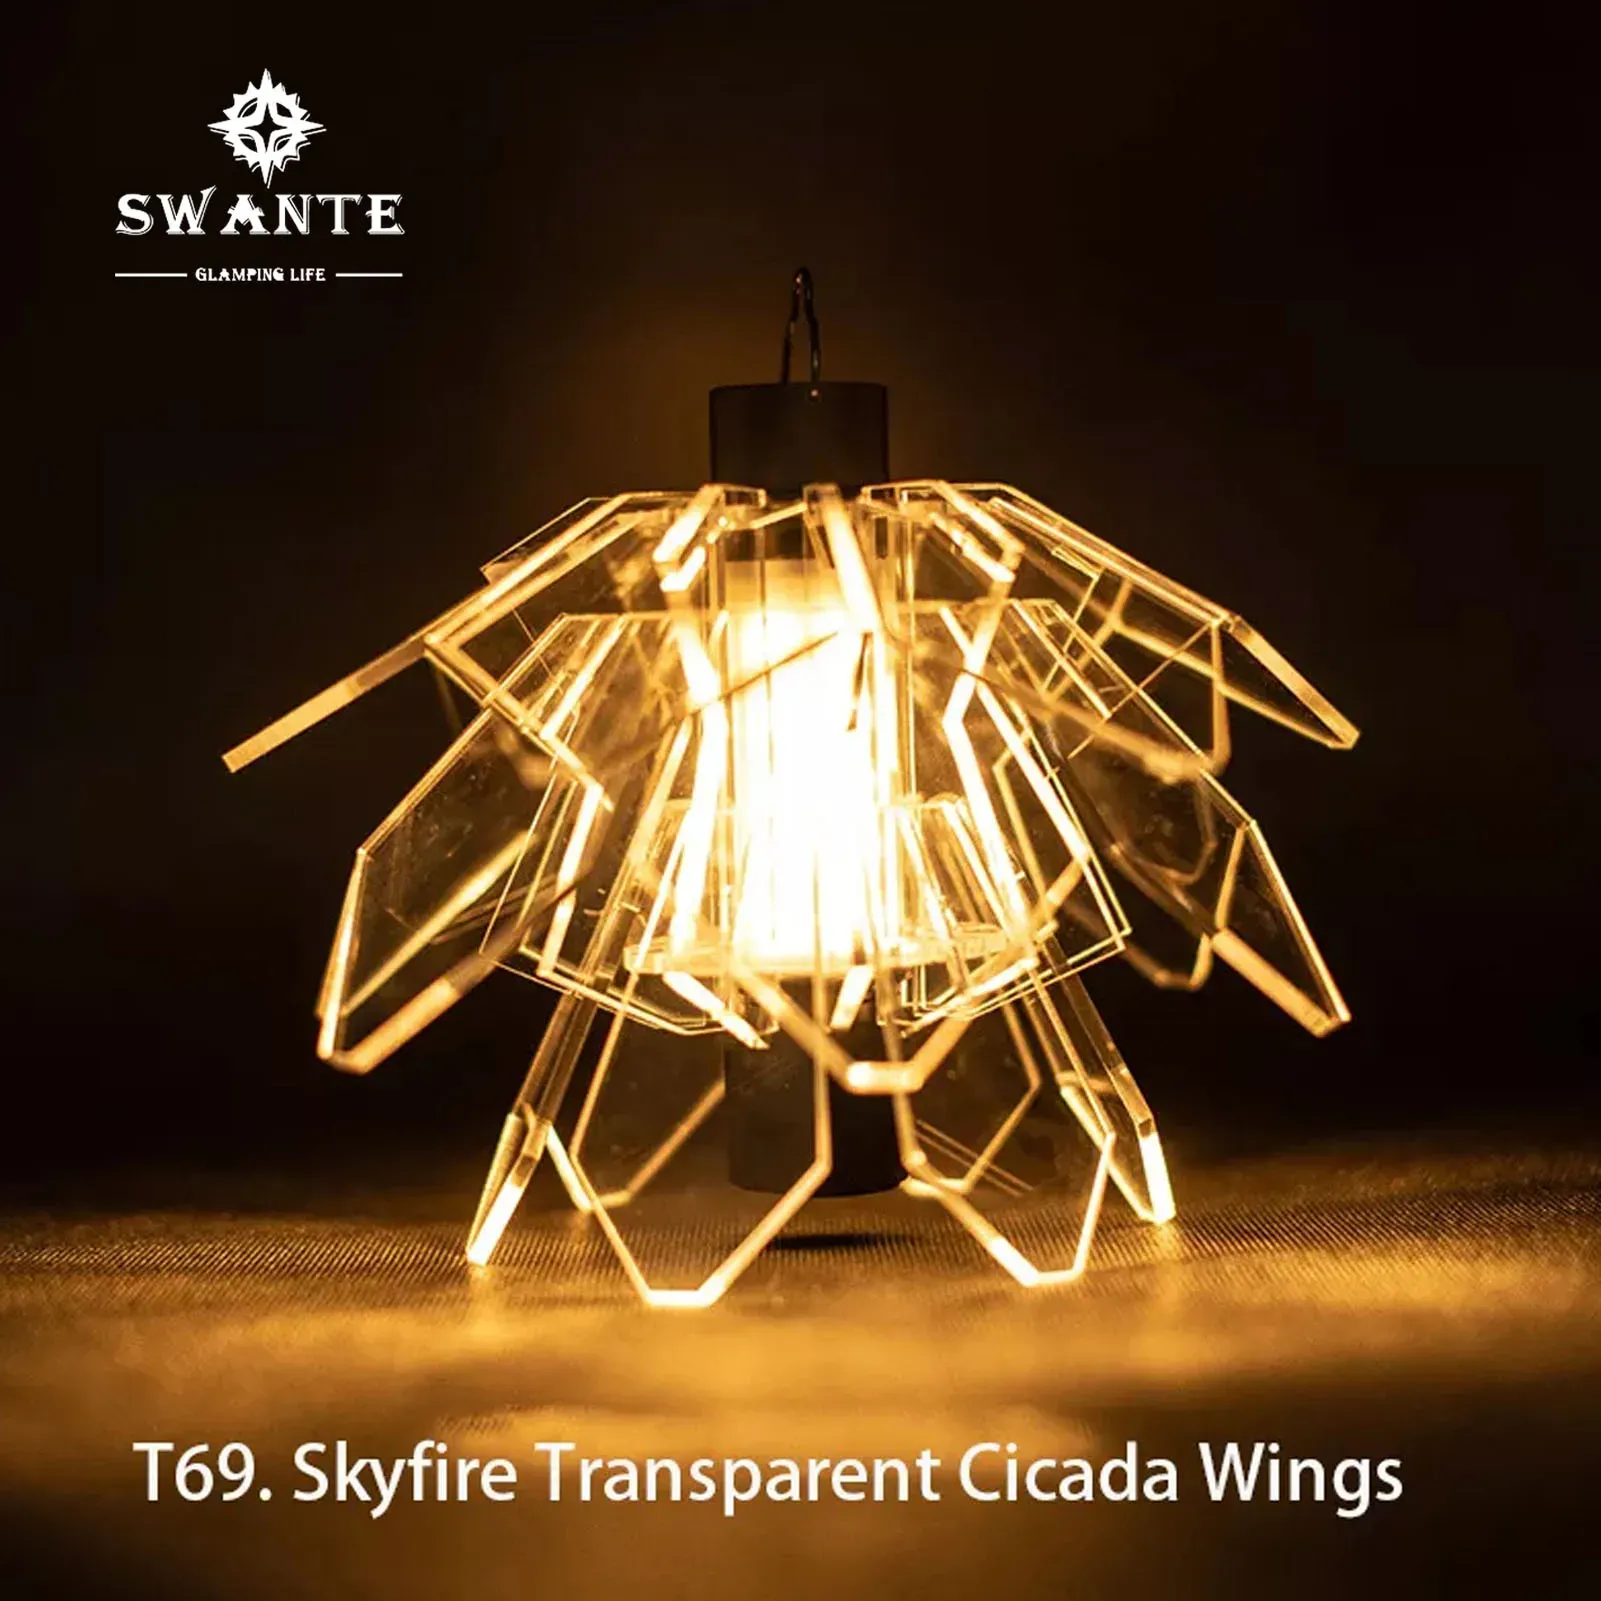 Tools New Swante Small Stick Lamp 5050 Workshop Brand Design Cicada Wings Outdoor Camping Lampenschirm Sky Fire Lampe für Outdoor Camping